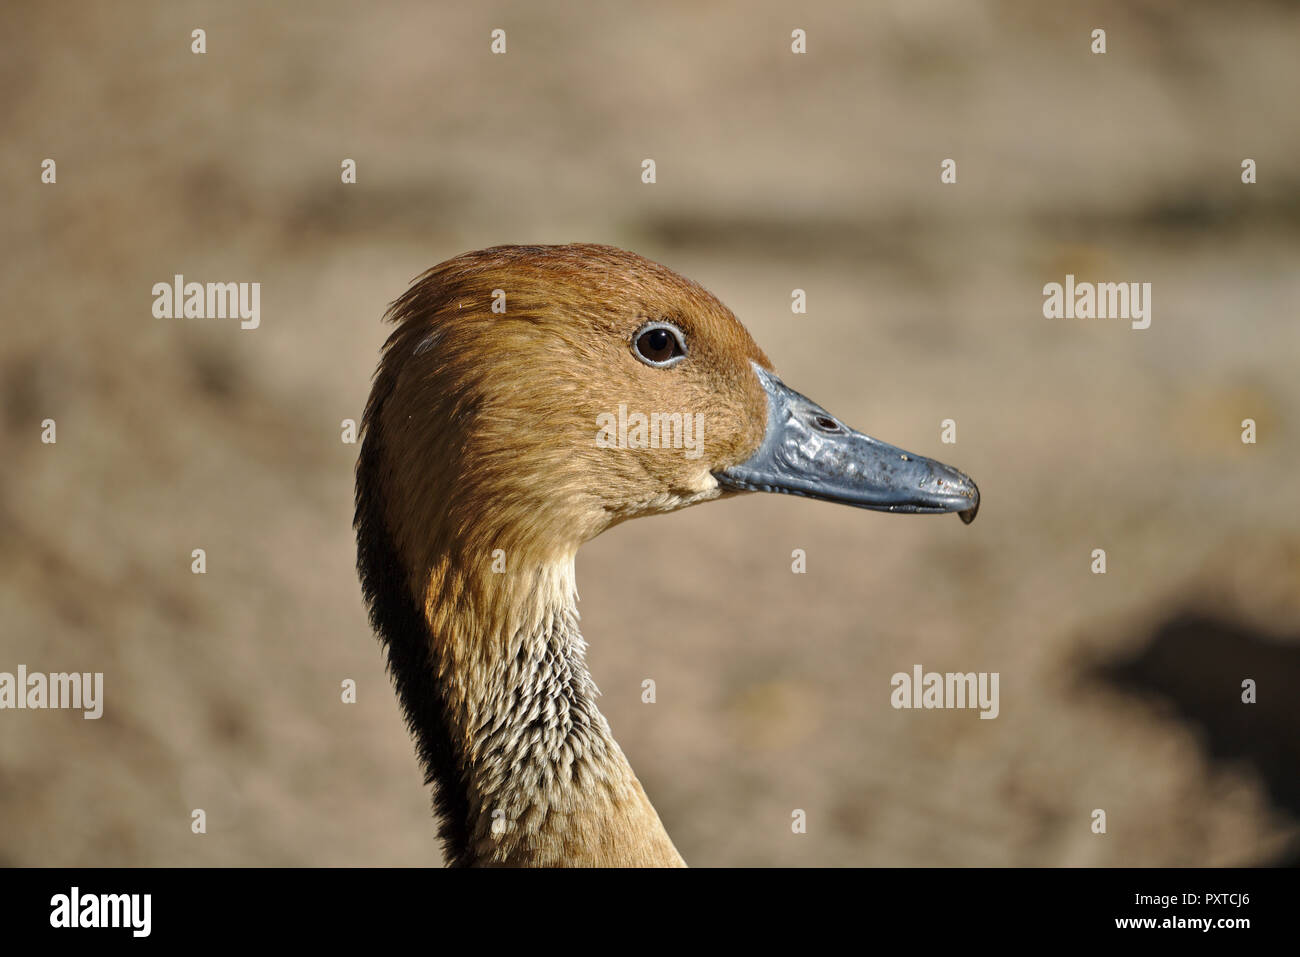 Head shot of a West Indian whistling duck Stock Photo